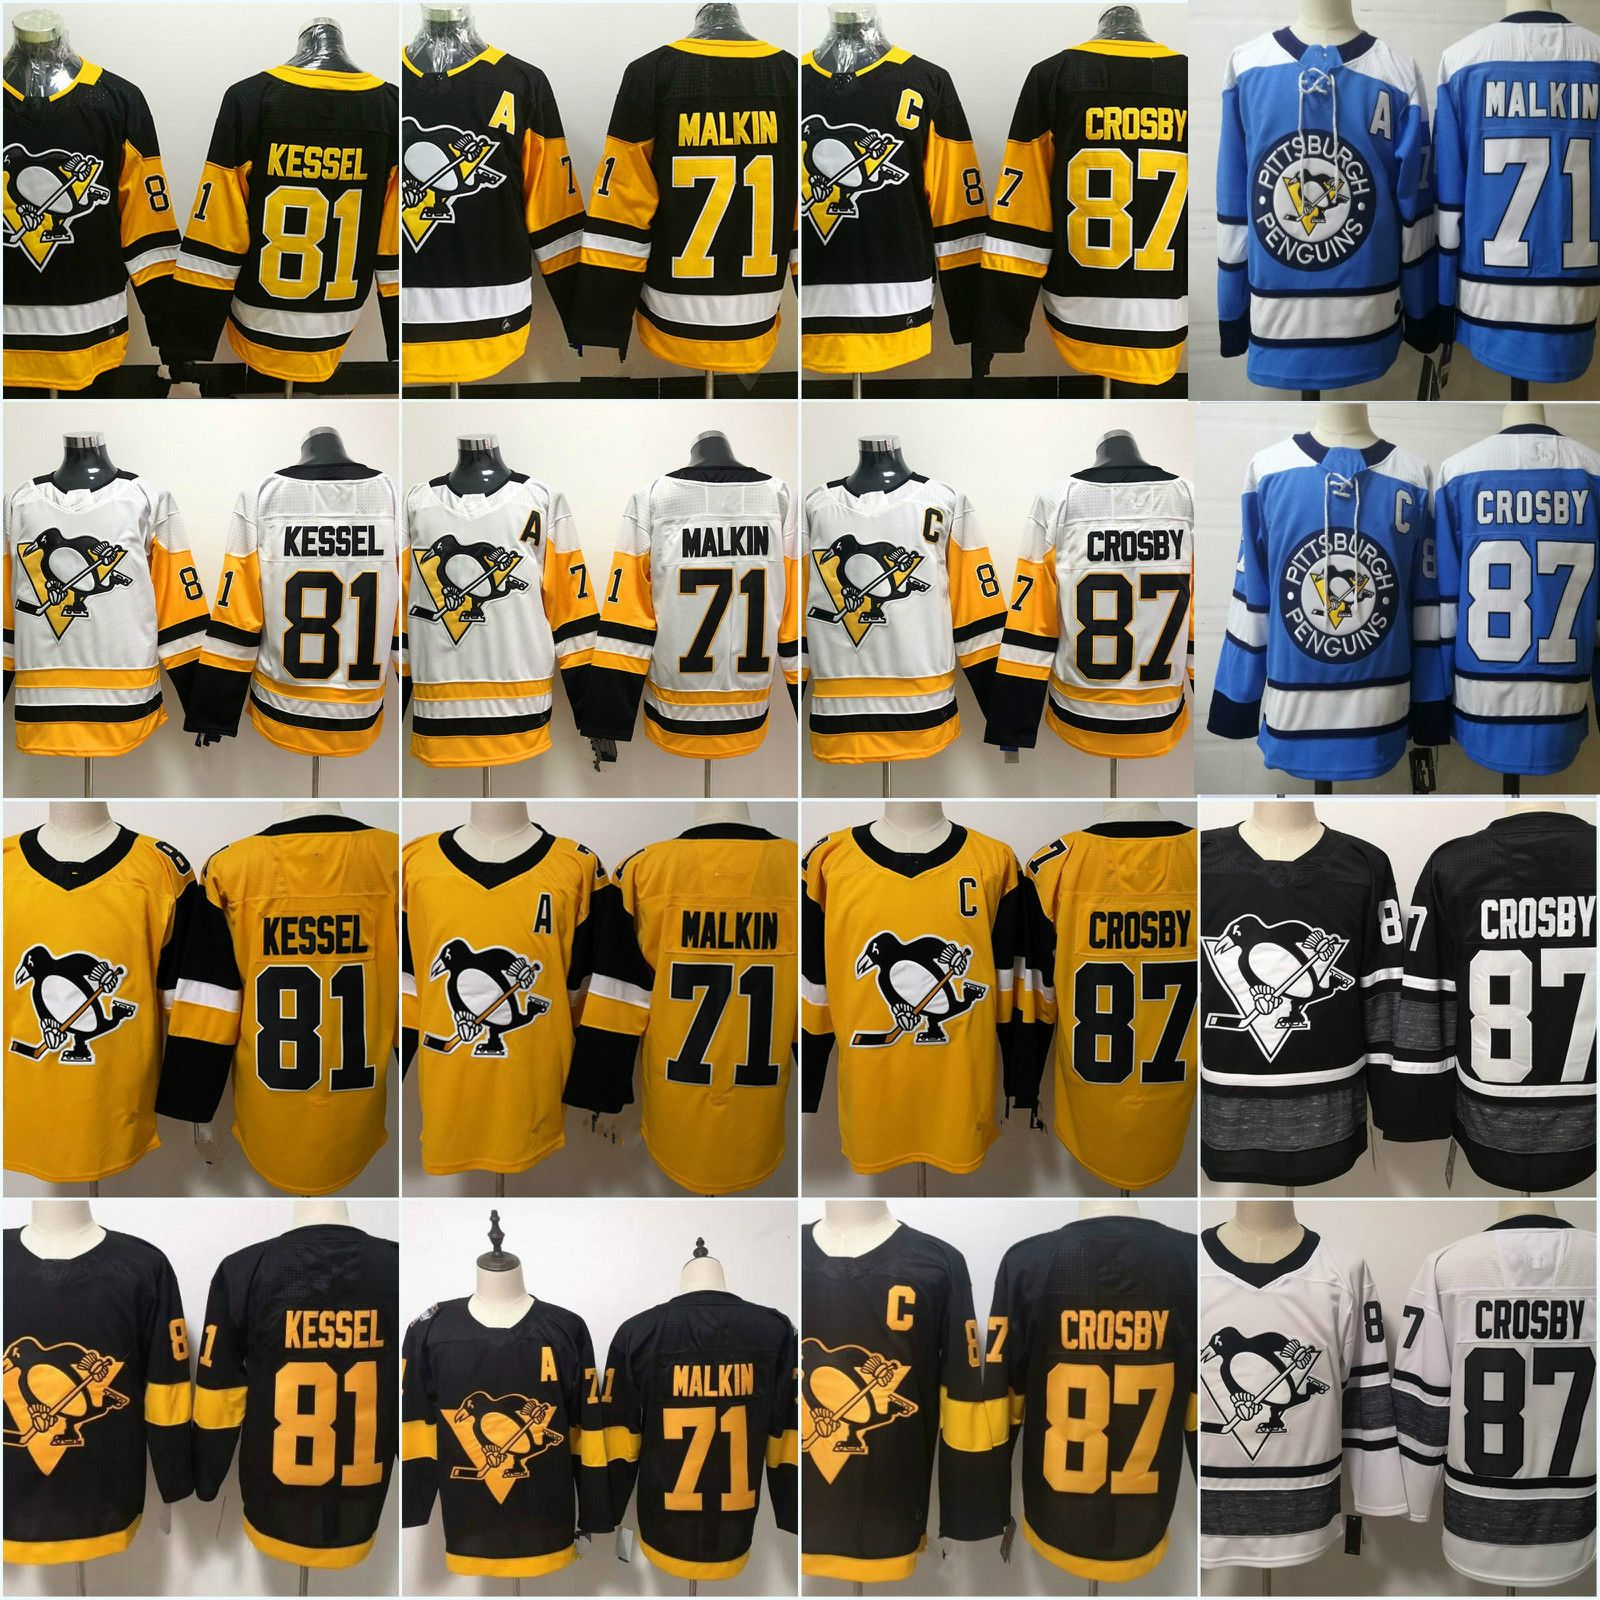 pittsburgh penguins jersey 2019